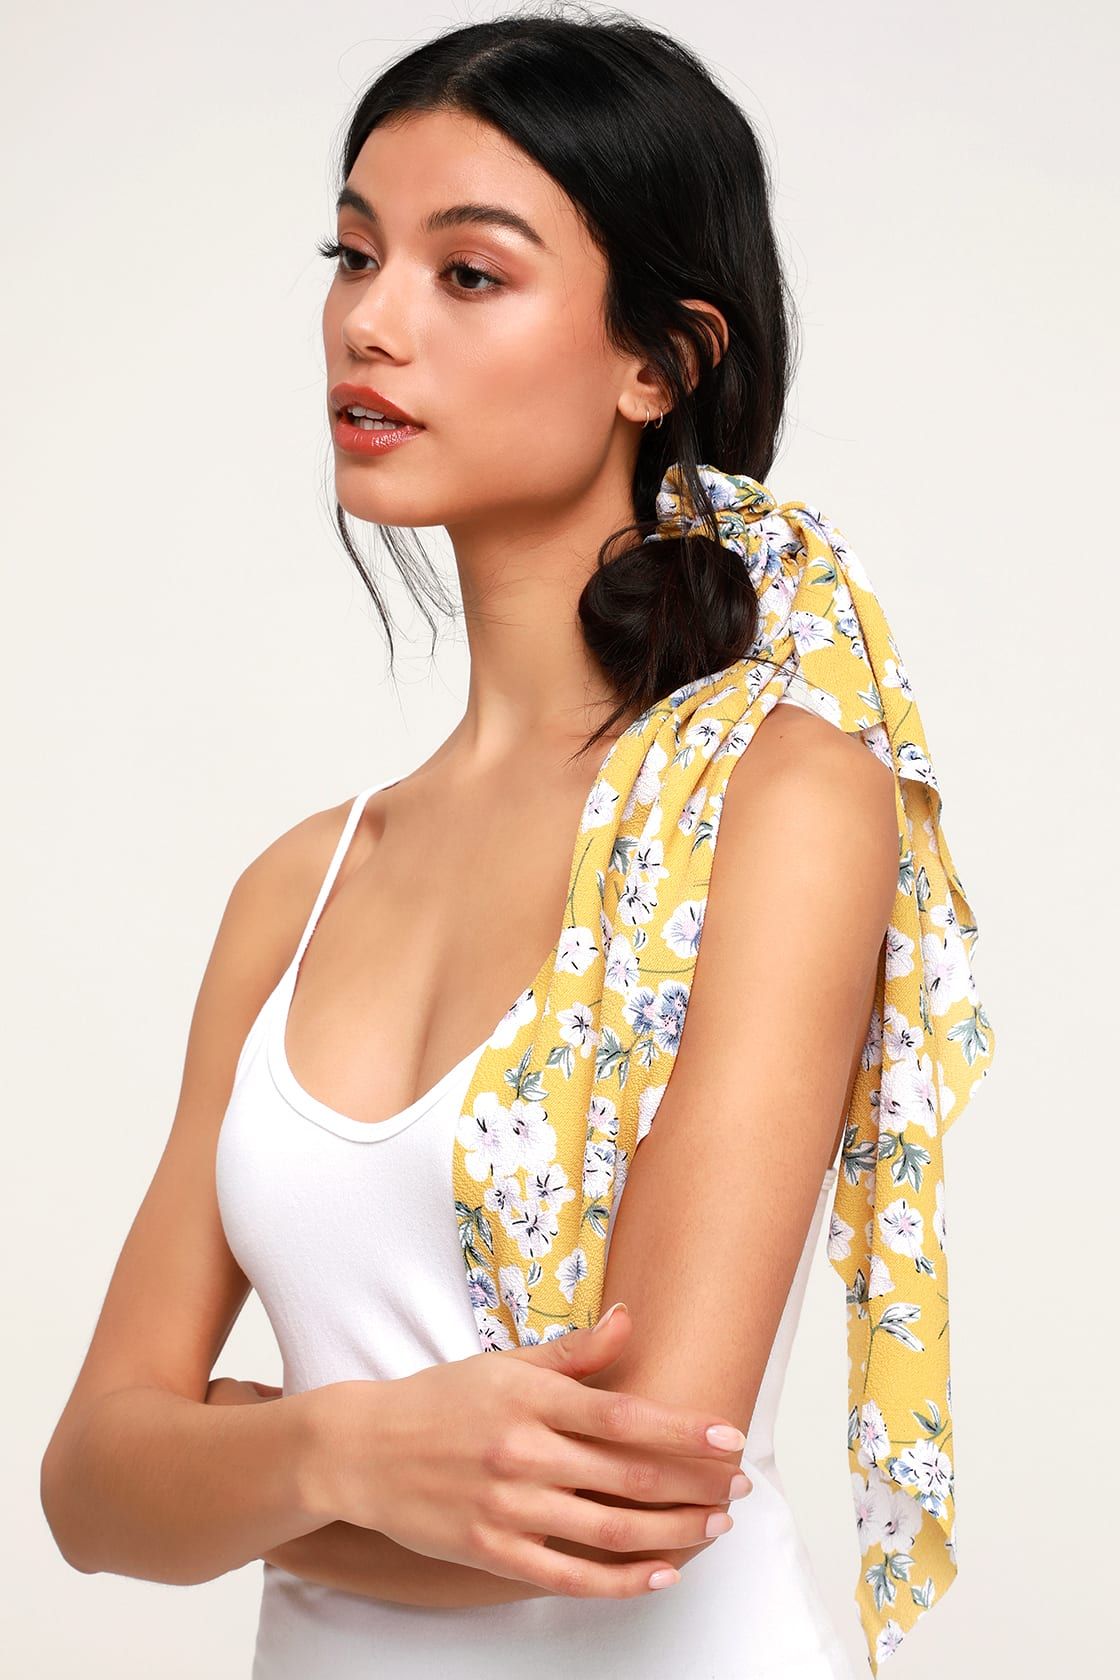 Breezy Blooms Mustard Yellow Floral Print Scarf Ponytail Holder | Lulus (US)